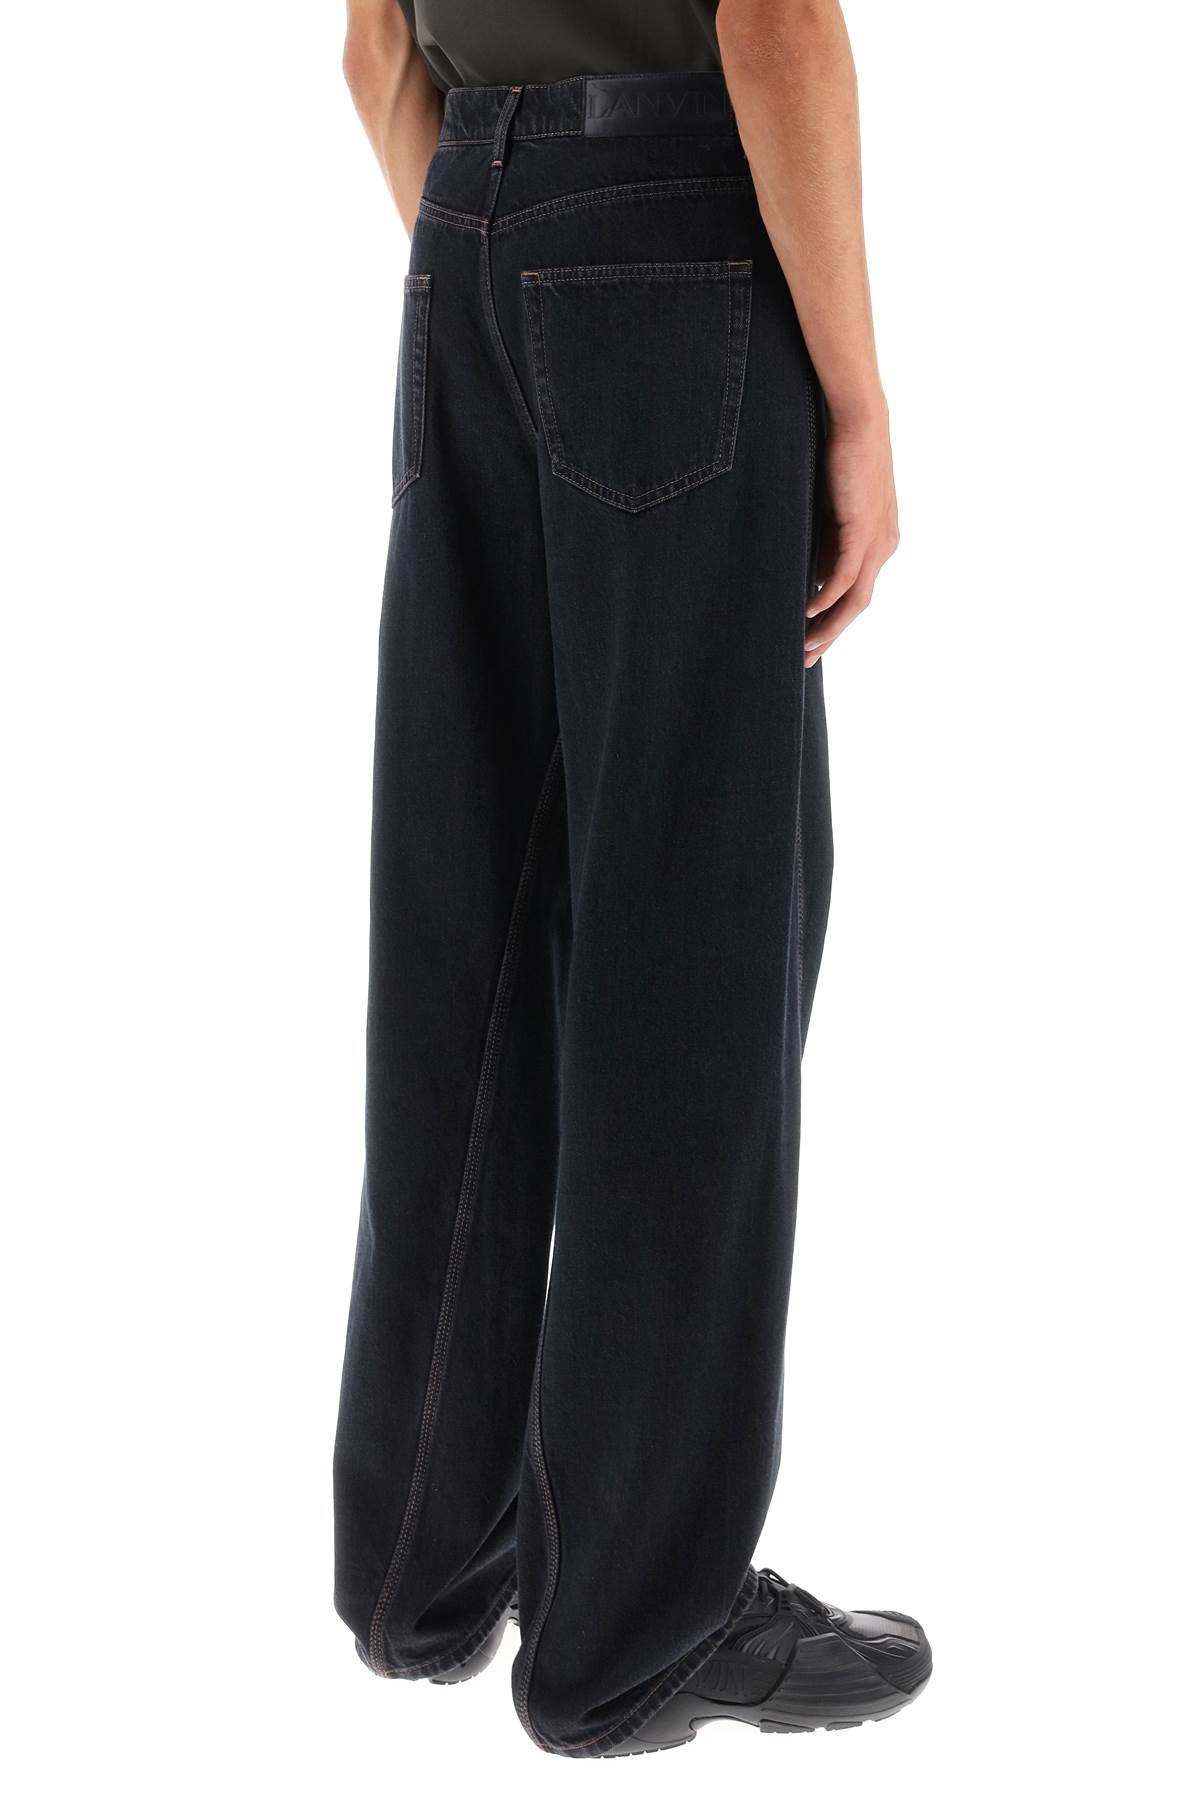 Lanvin Lanvin baggy jeans with twisted seams